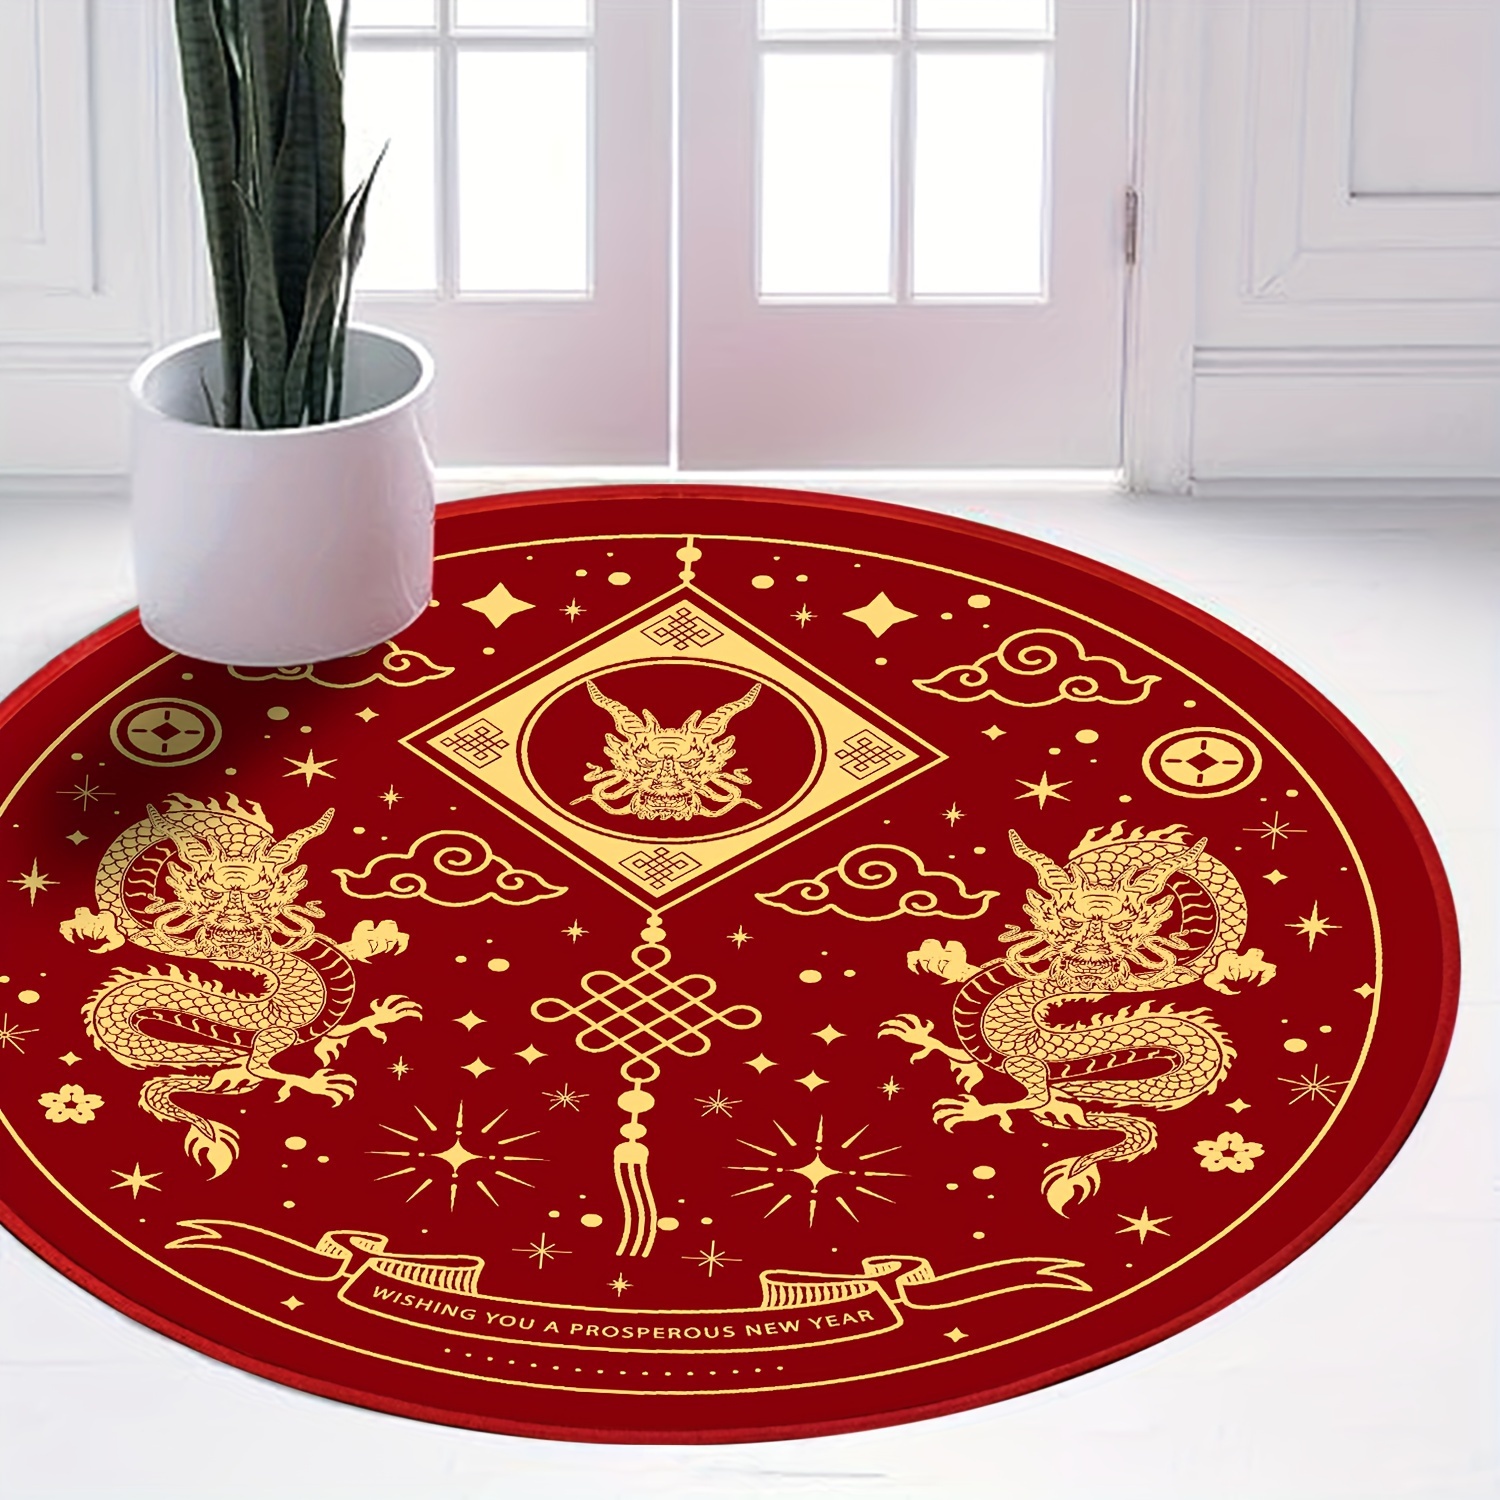 

Golden Dragon Chinese Festive Red, Carpet Chinese New Yea, Non Slip Absorbent Round Rug, Washable Floor Carpet Yoga Mat Easy To Clean For Entryway Living Bedroom Office Study Dorm, Christmas Décor Rug